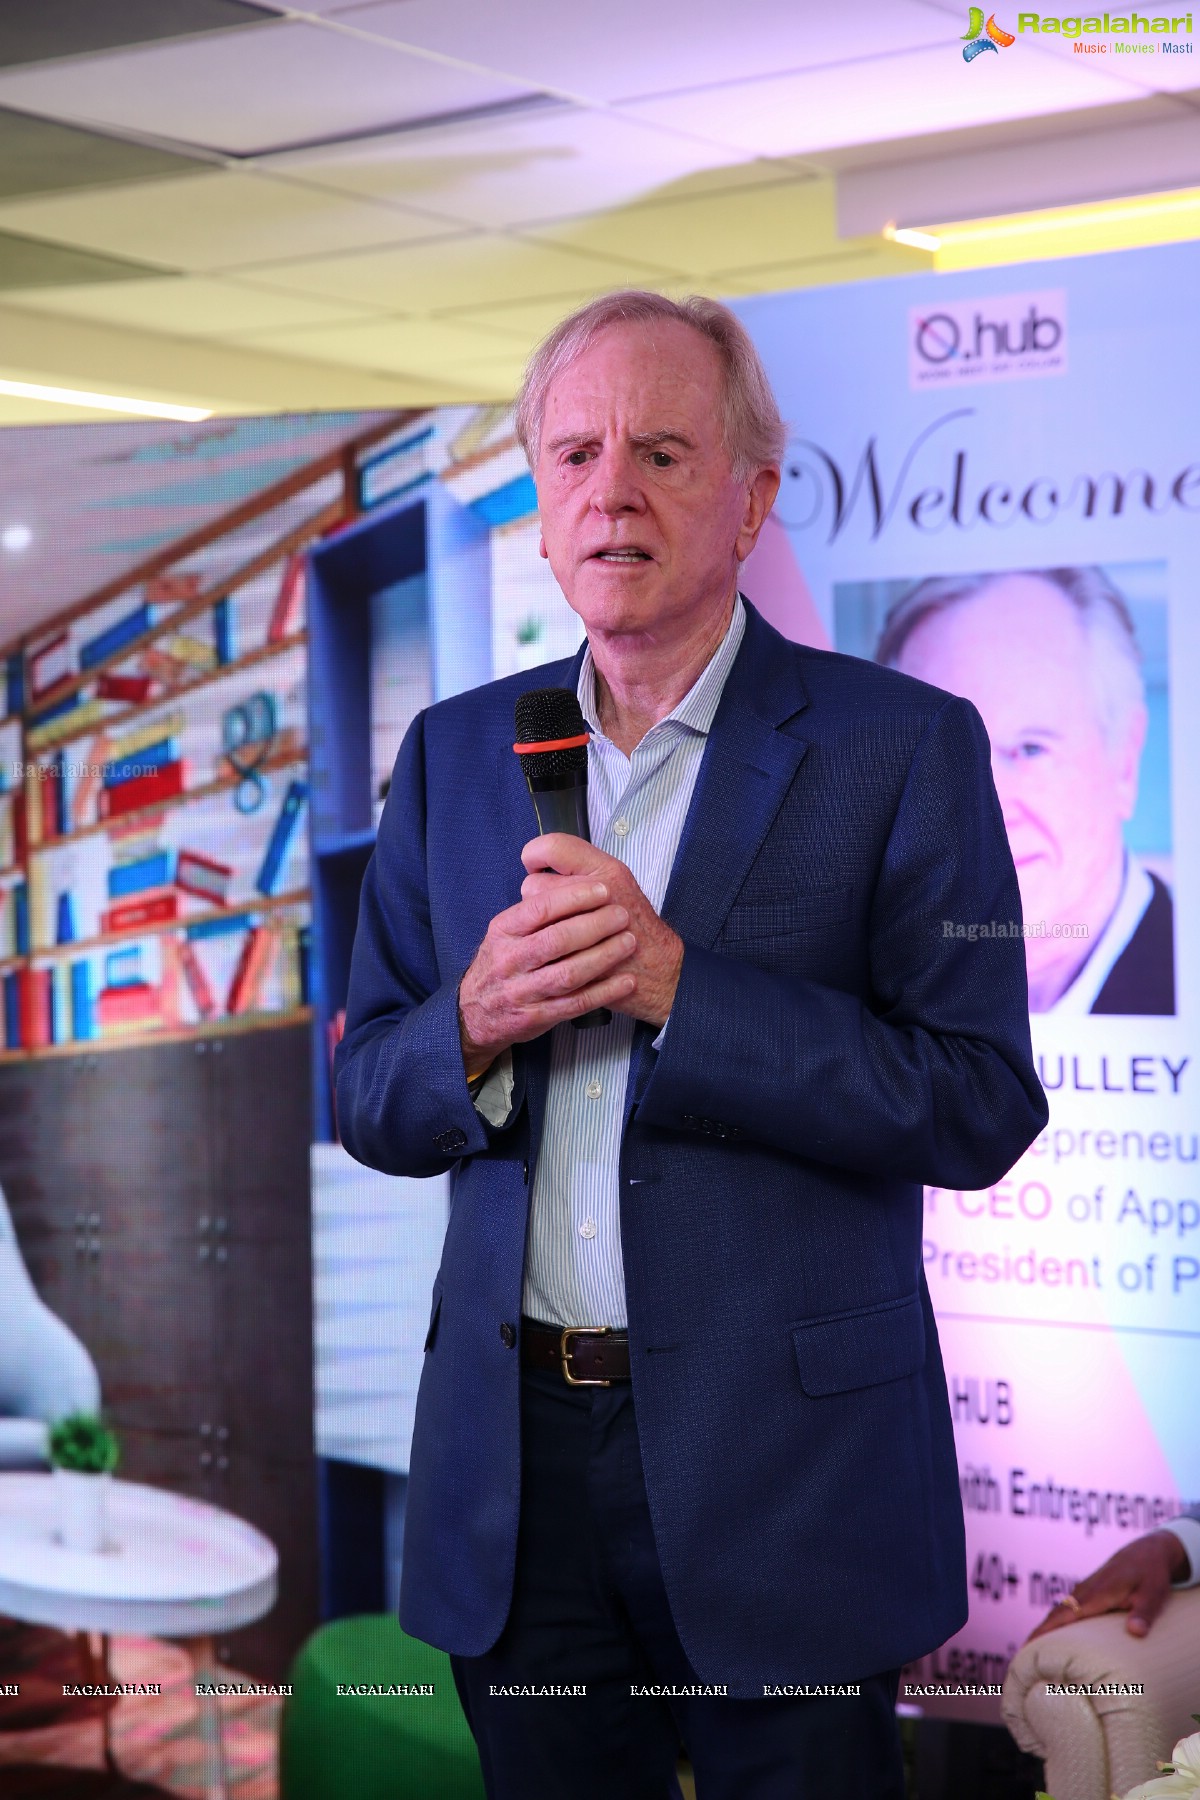 Q Hub Launch, Meet and Greet with John Sculley Former CEO of Apple &  Former President of Pepsi